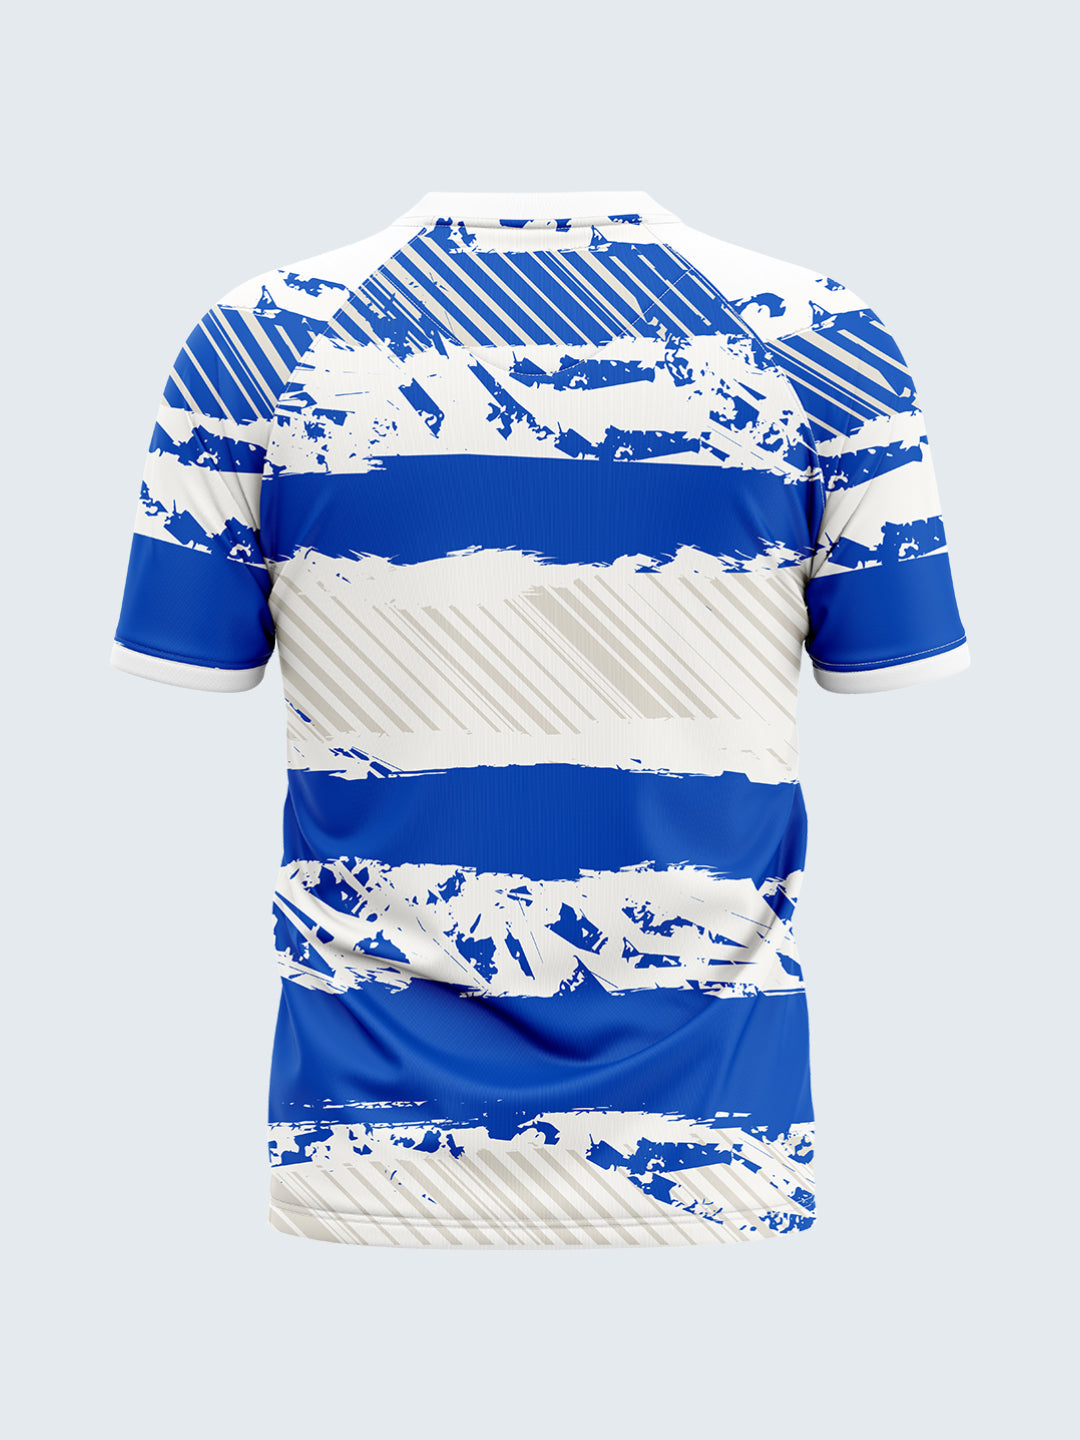 Customise Blue Rugby Jersey - 2138BL - Front